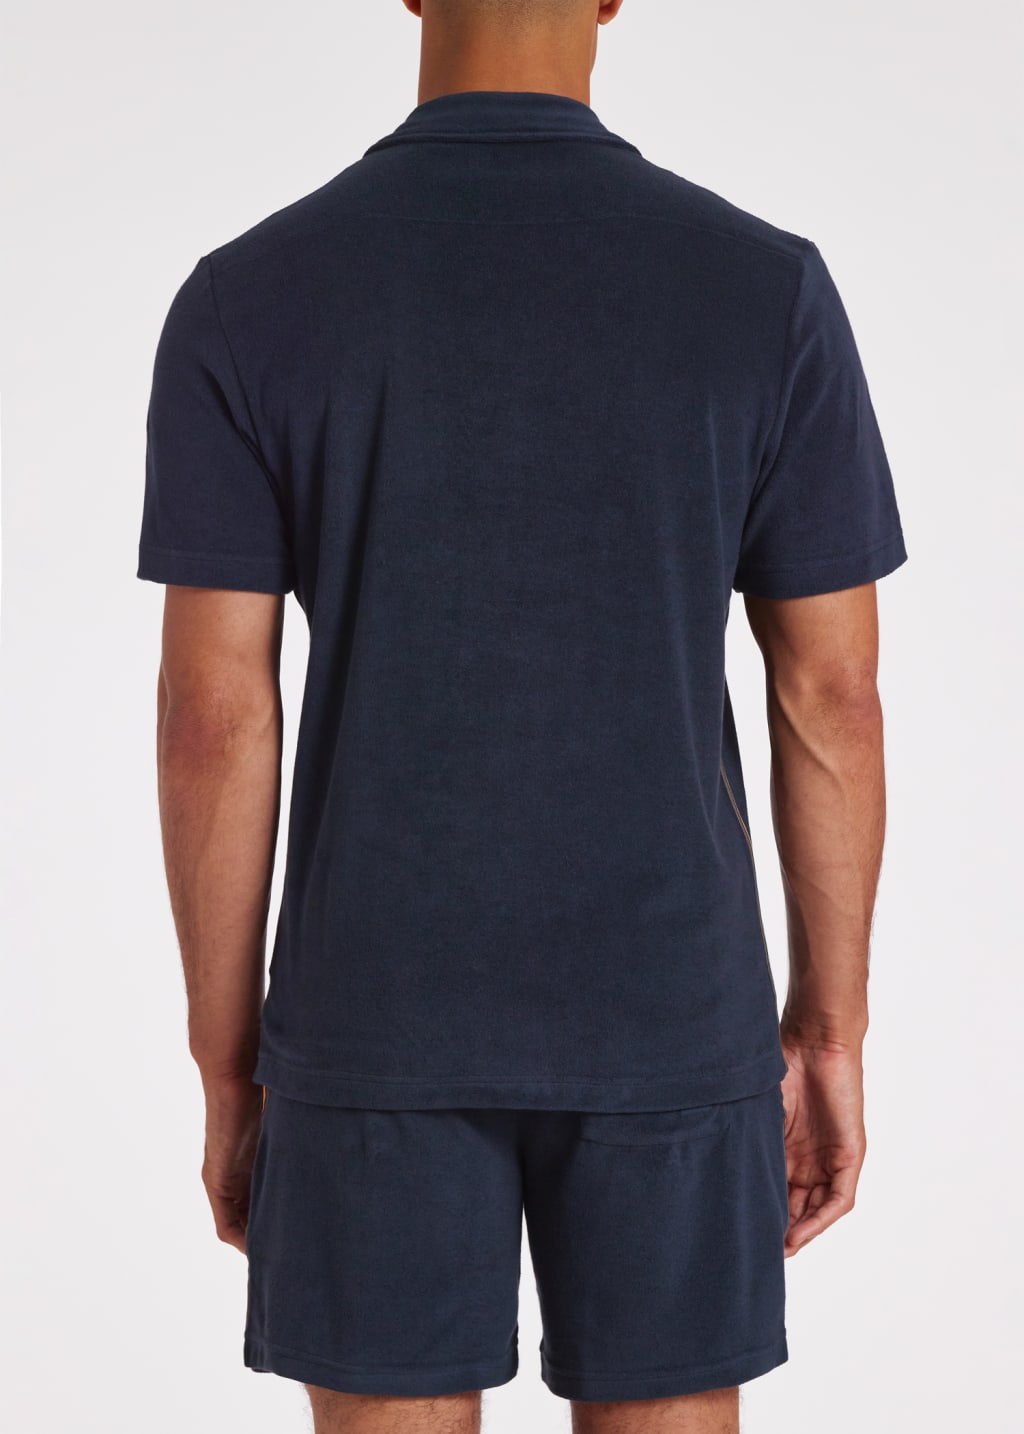 Model View - Navy Blue Towelling Lounge Shirt Paul Smith